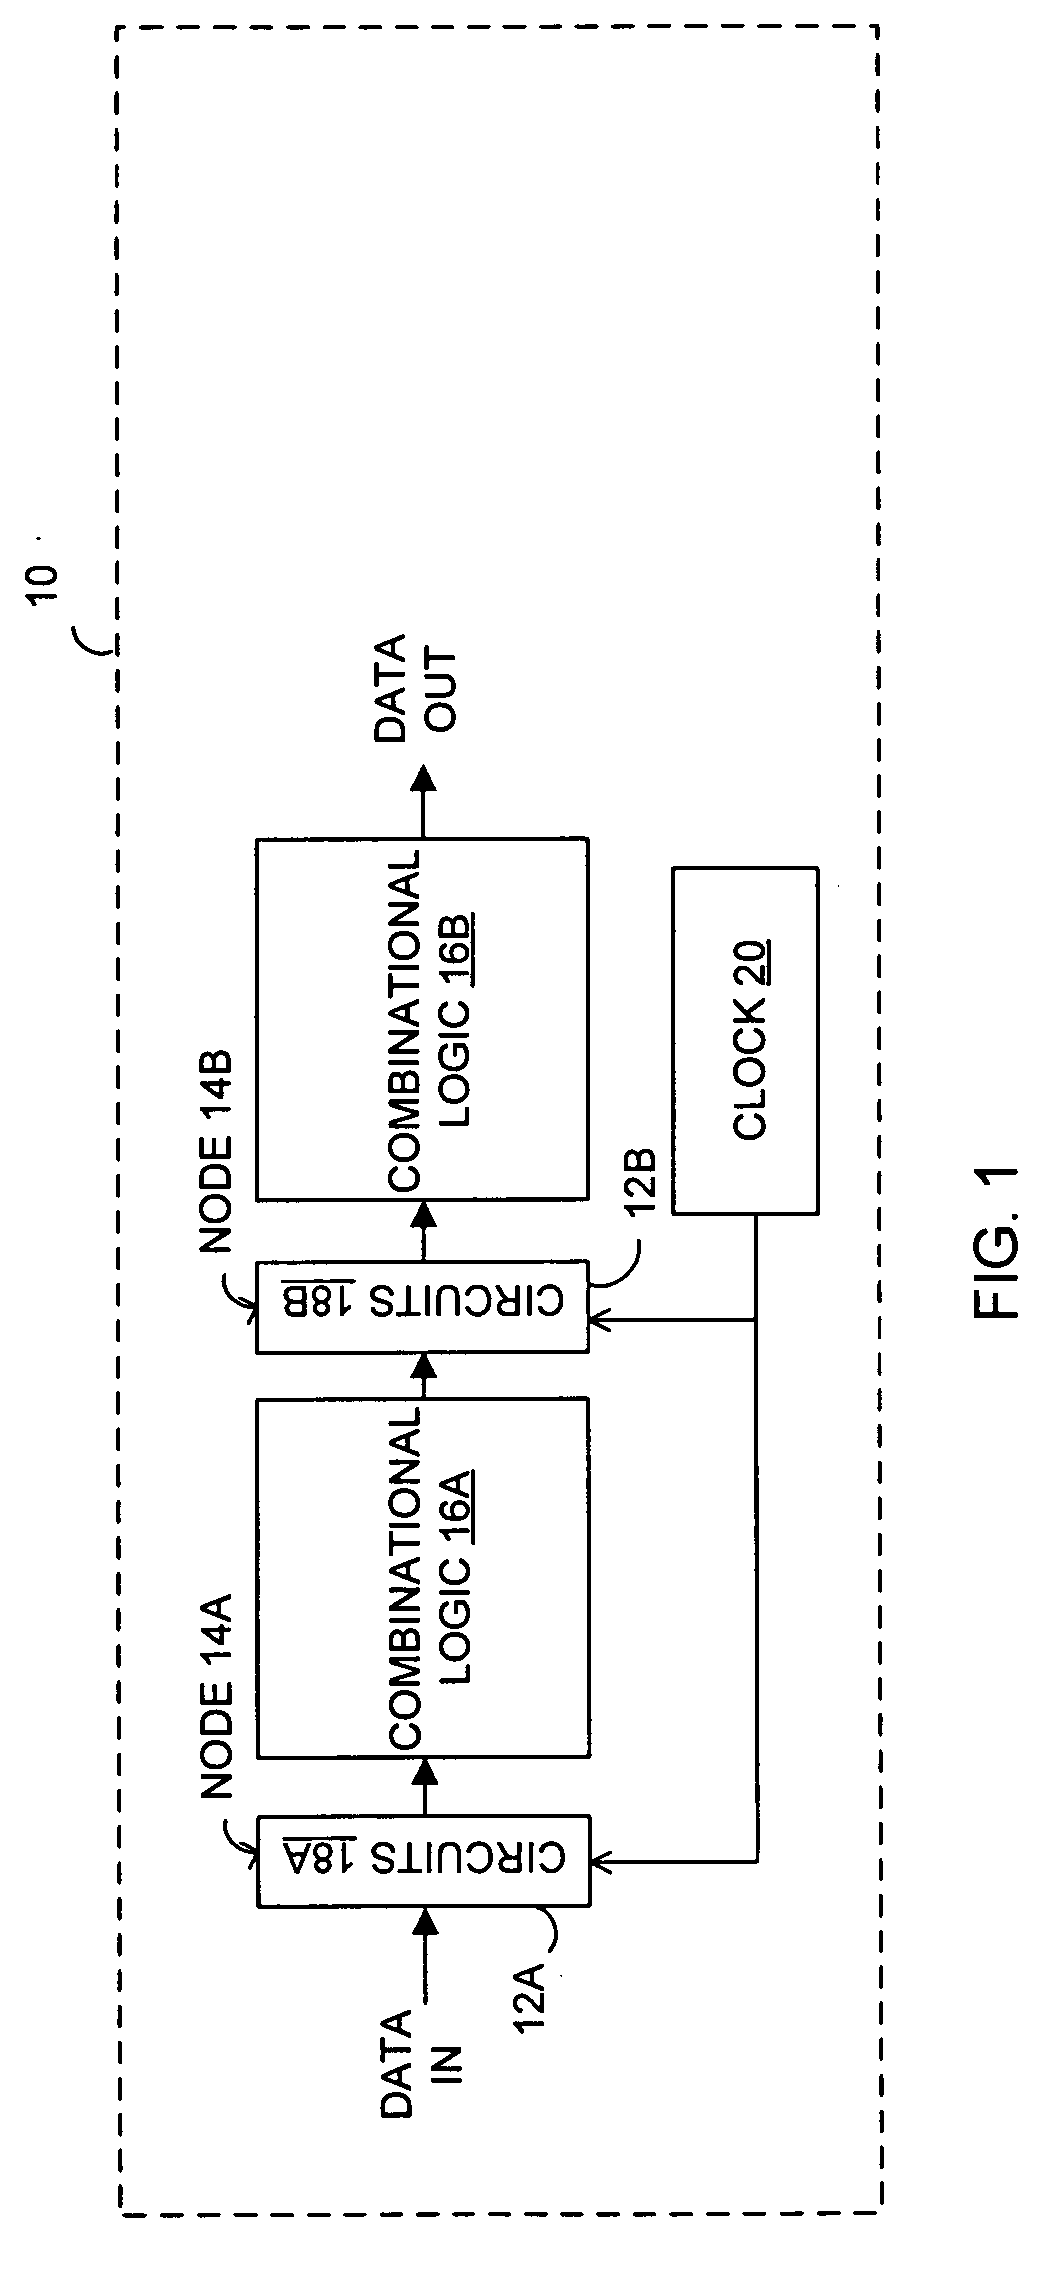 System and shadow bistable circuits coupled to output joining circuit